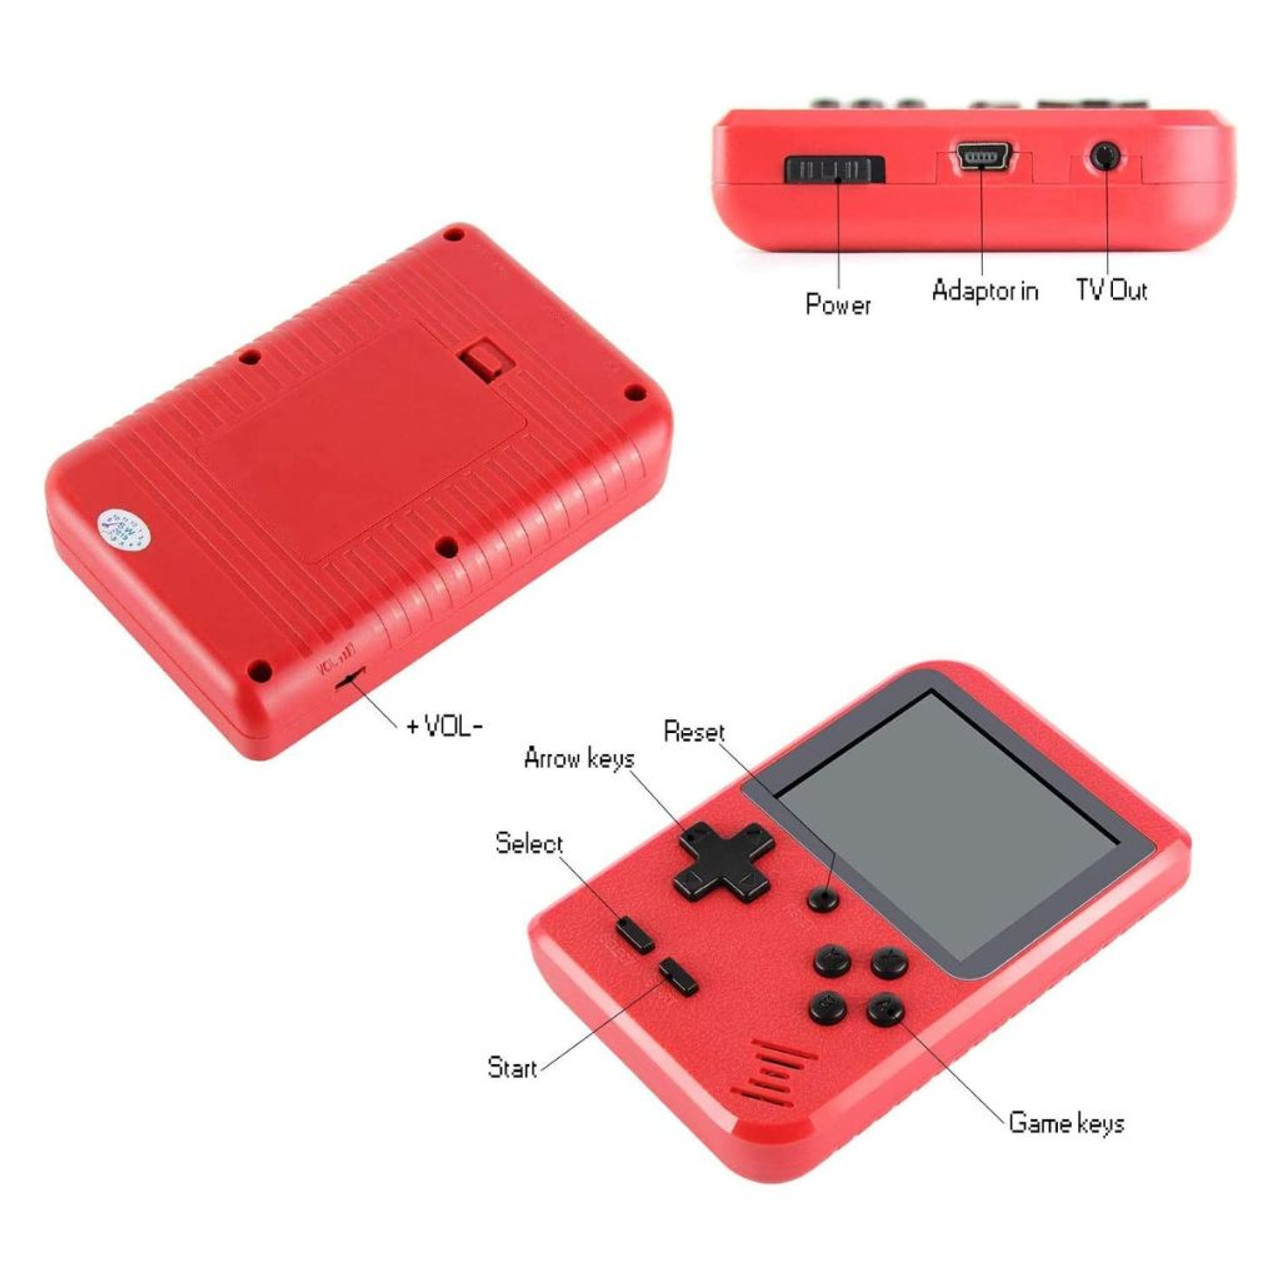 Portable Handheld Game System with 400 Inbuilt Classic Games product image